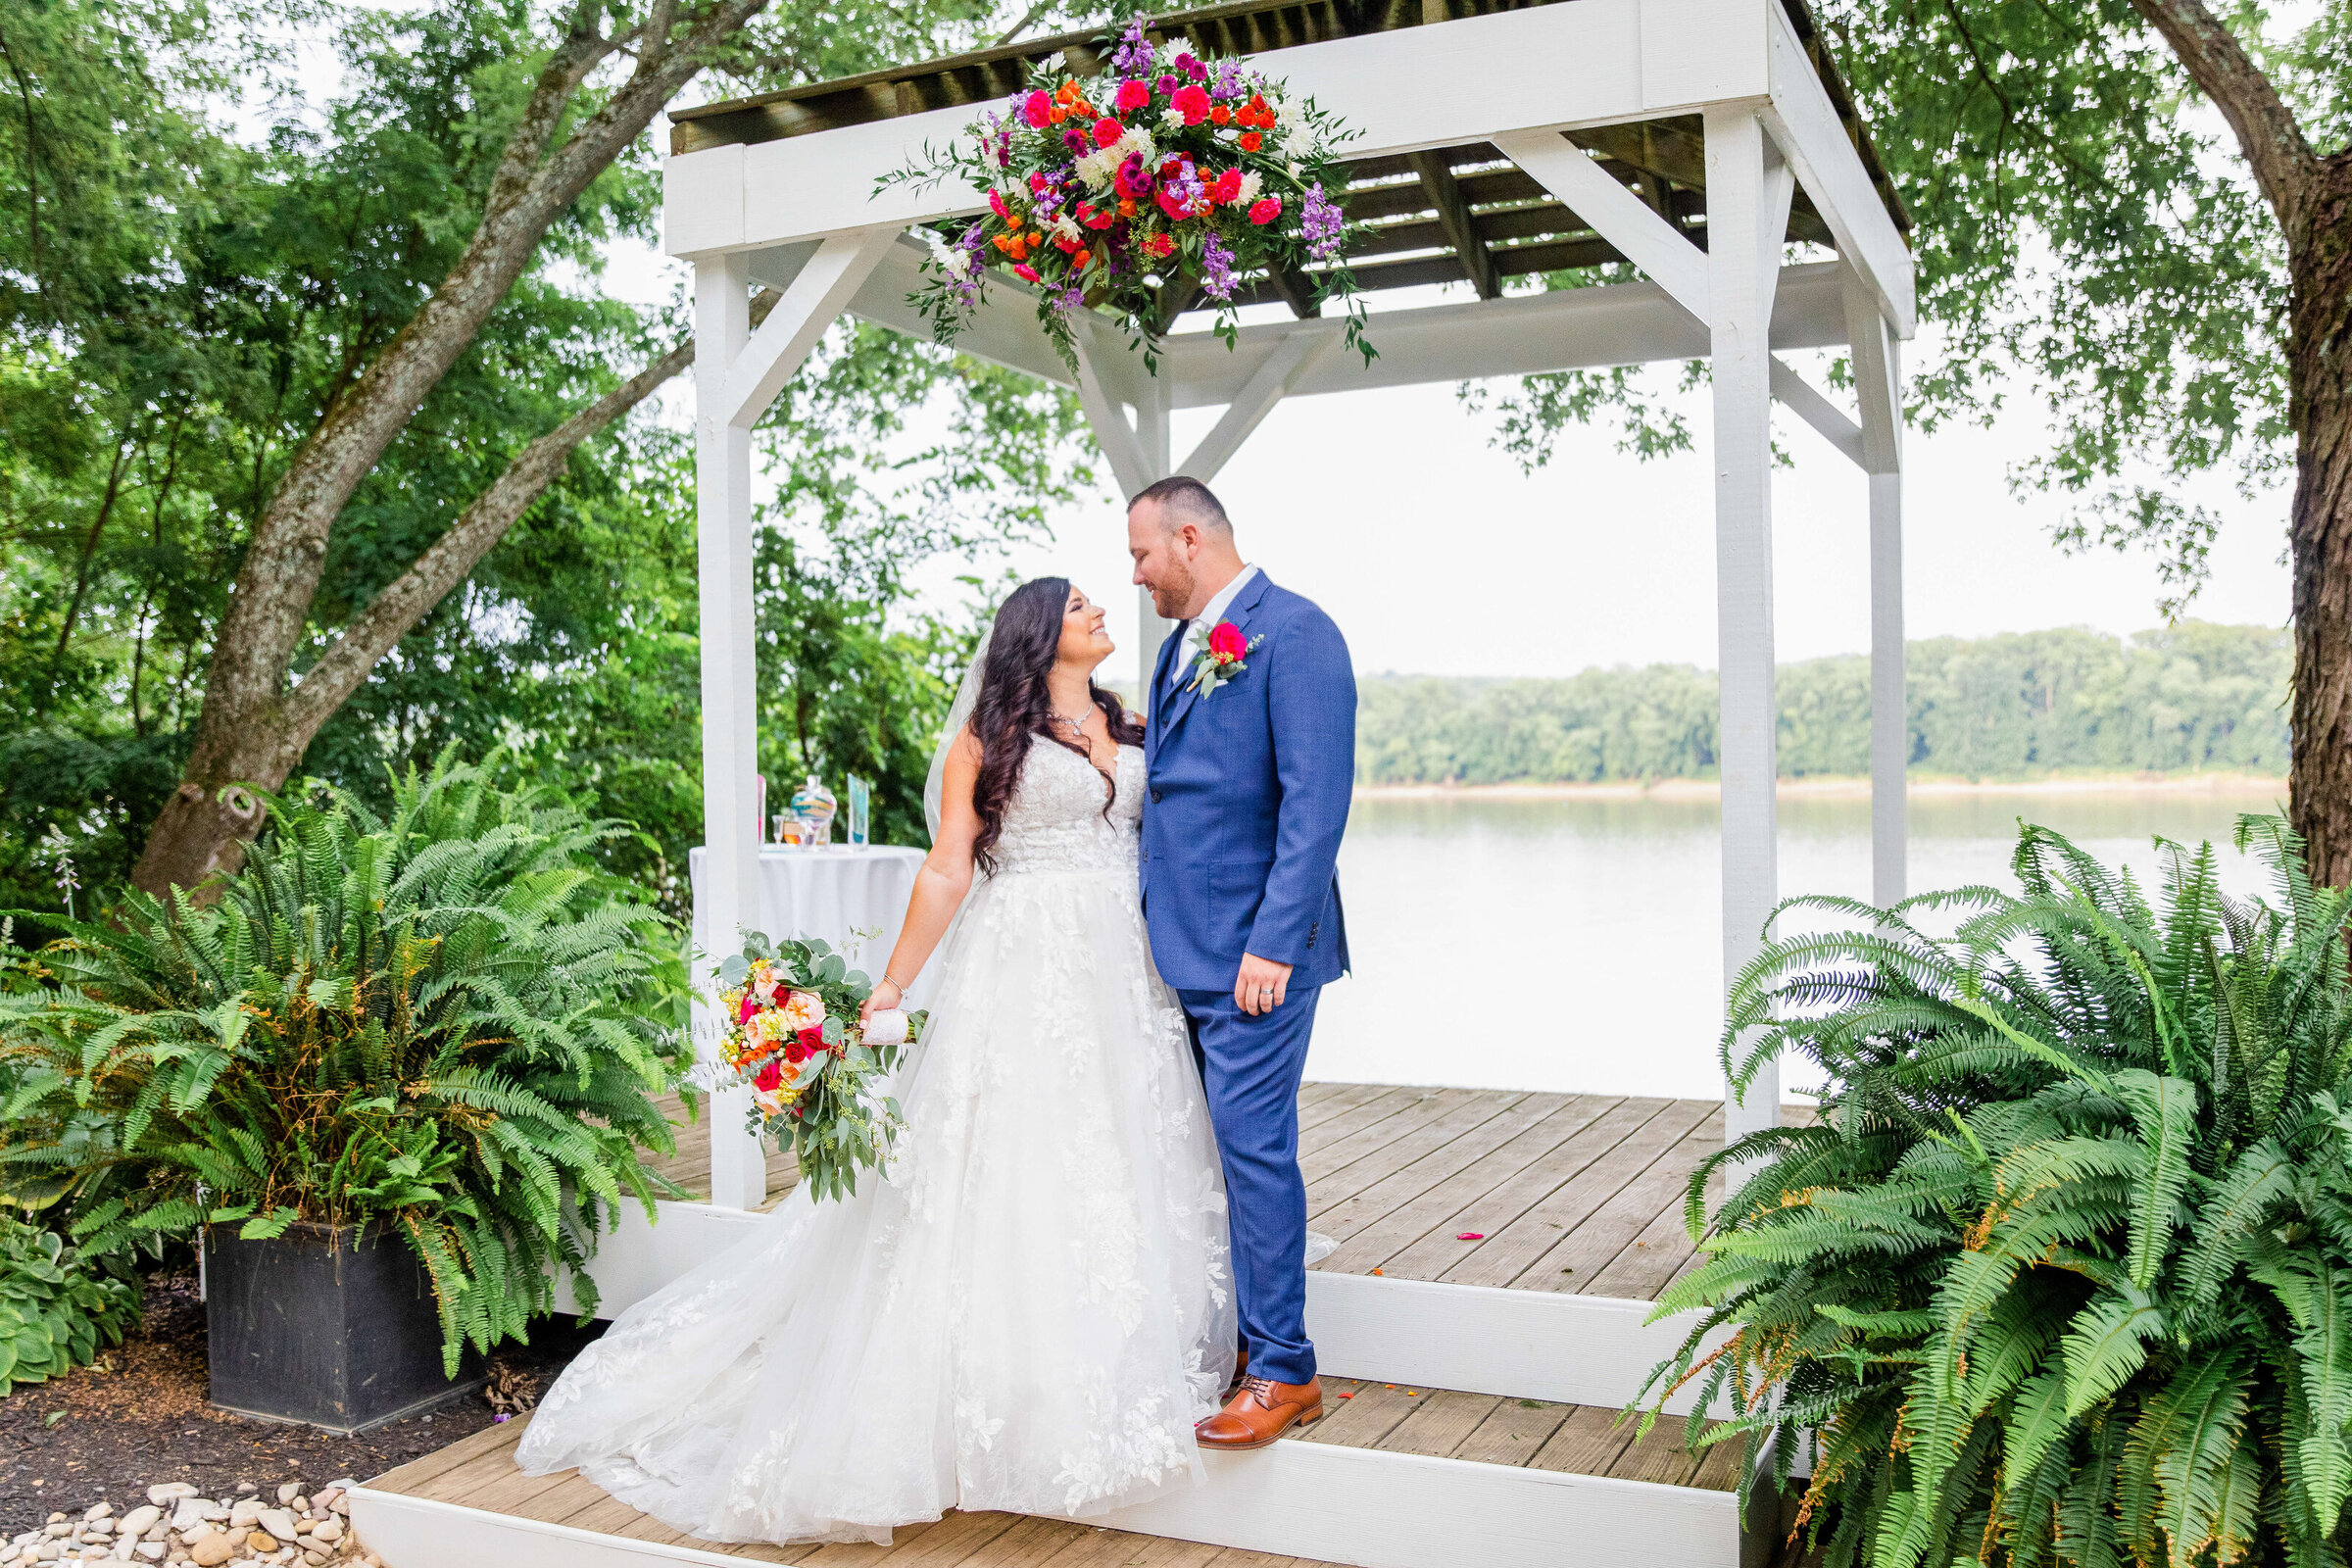 A bride and groom stand at their ceremony location, a pergola. The bride is carrying a white and pink bouquet and is on the lower step  while the groom, in a blue suit, is above her, smiling down at her.